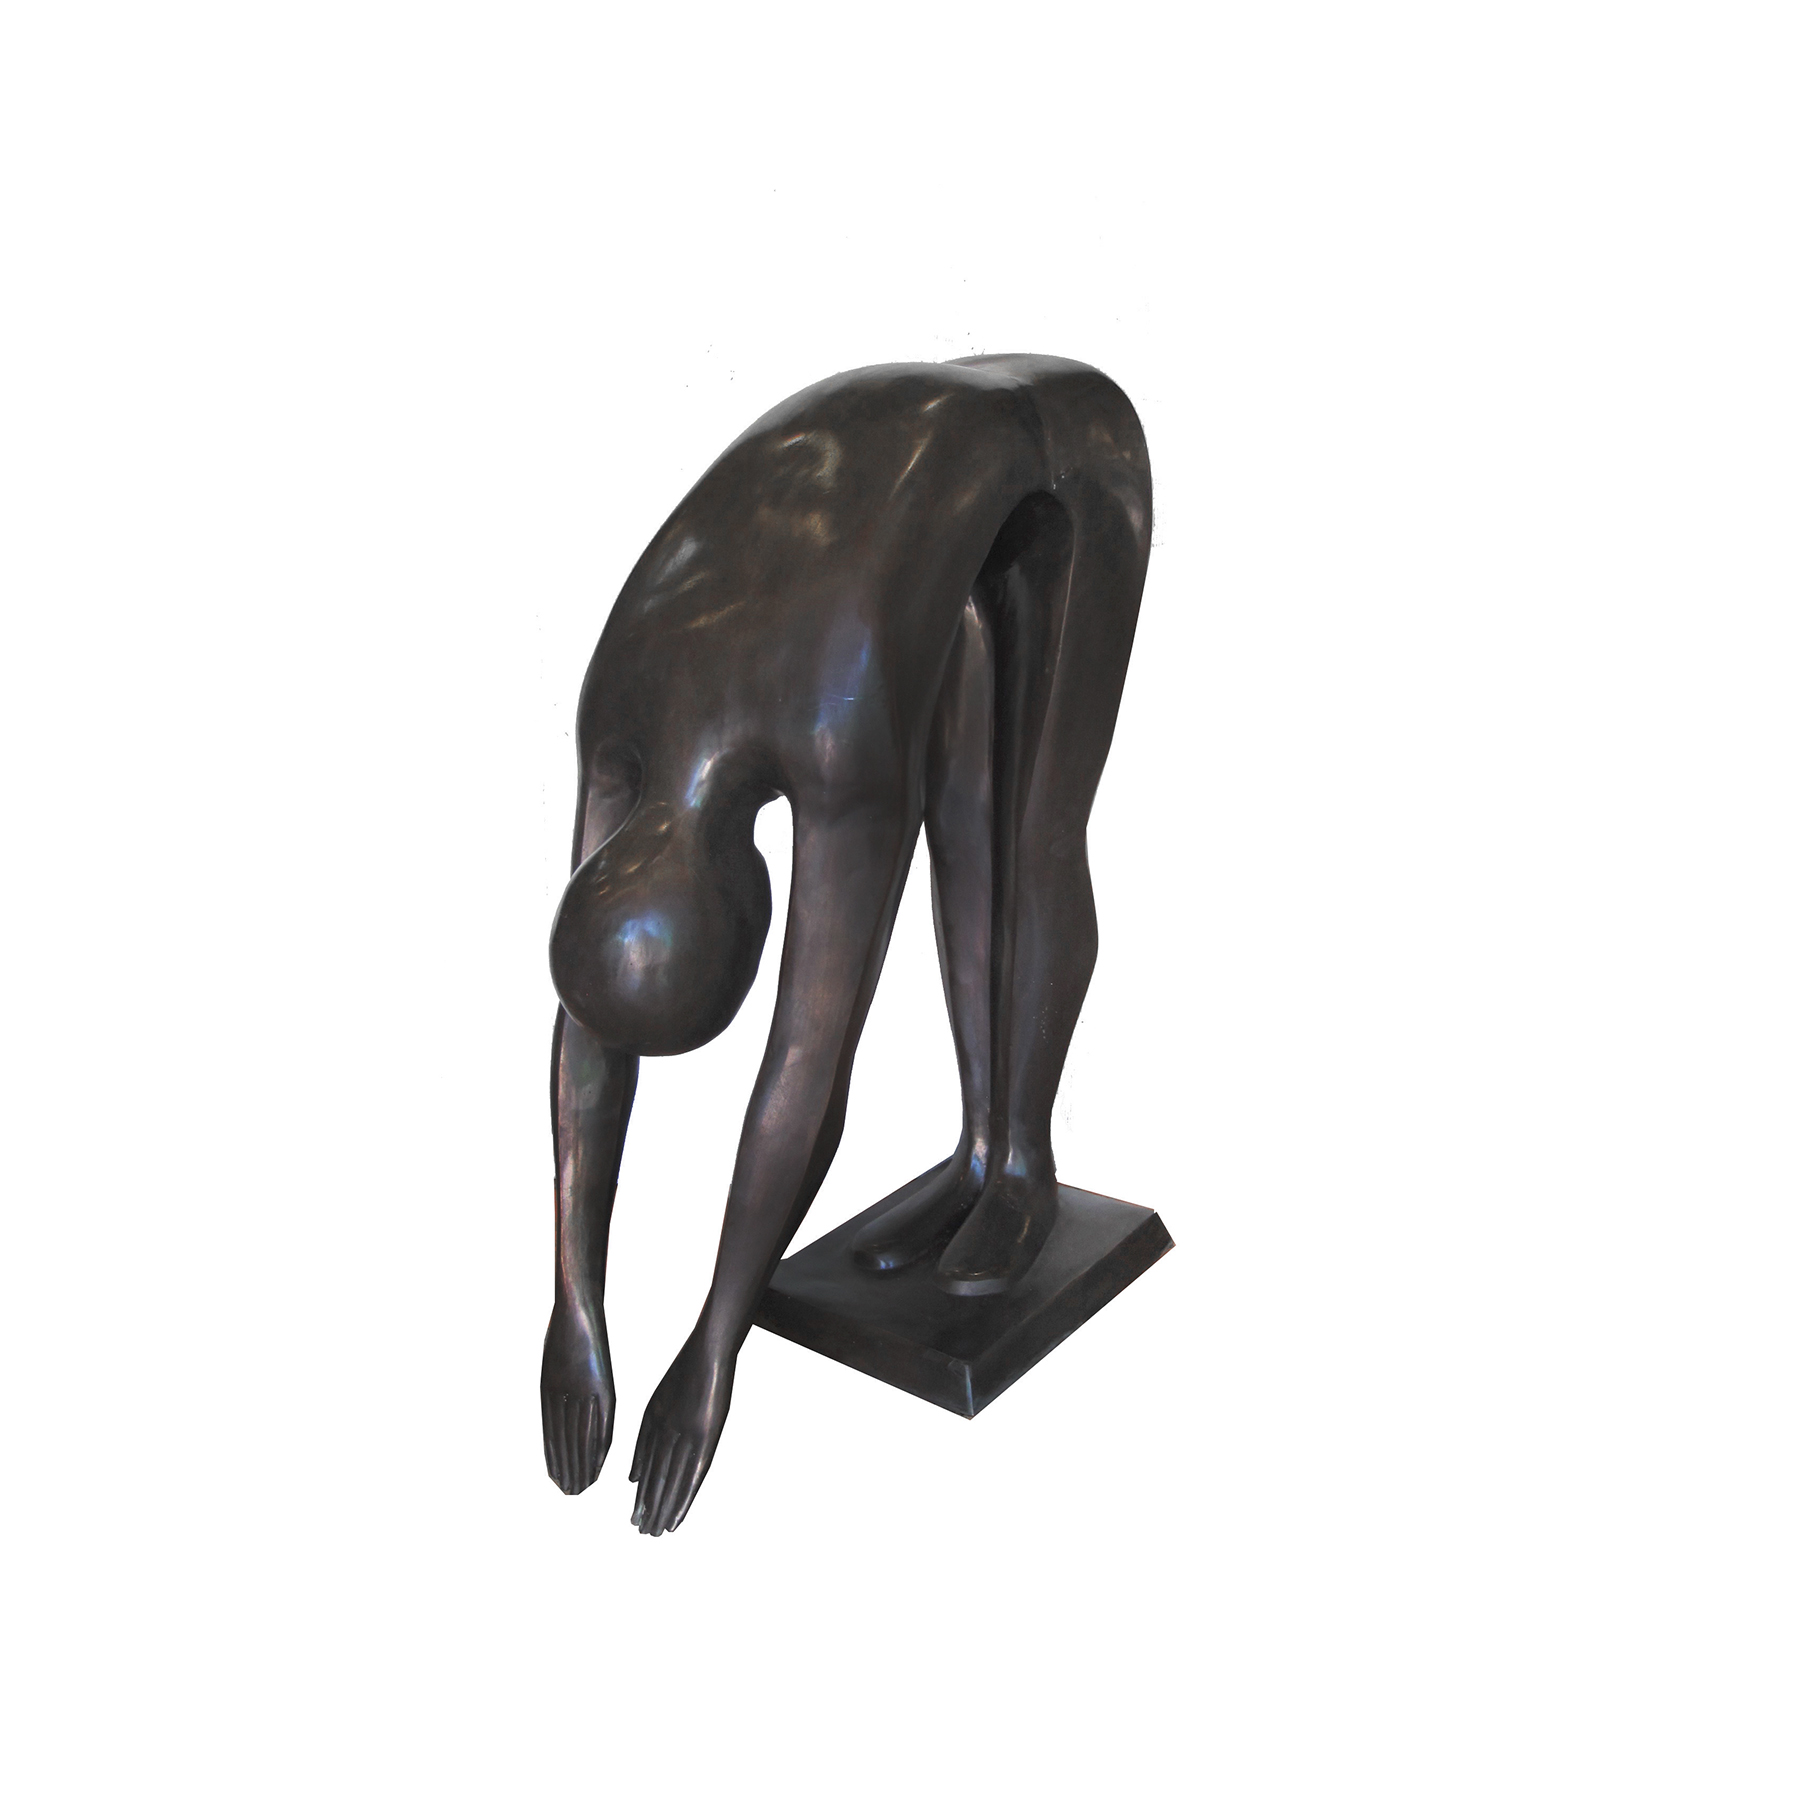 SRB707190 Bronze Small Contemporary Downward Diver Sculpture by Metropolitan Galleries Inc